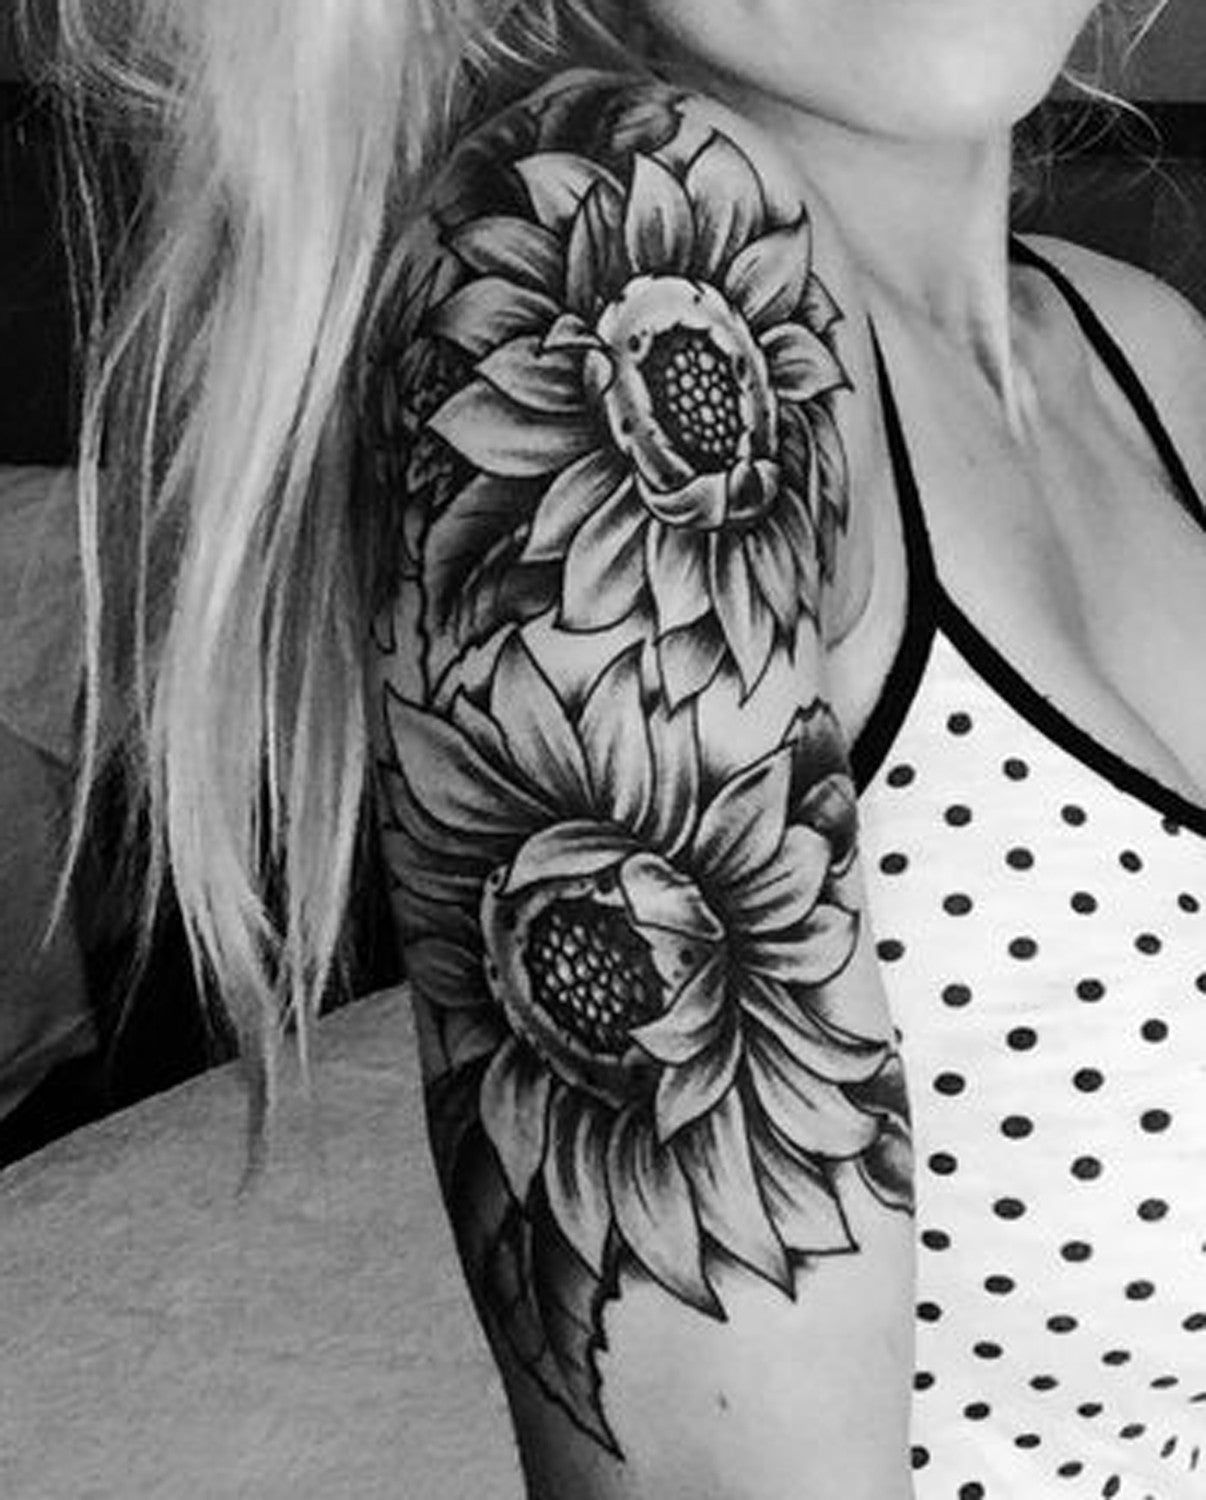 80 Lotus Tattoo Designs With Their Meanings